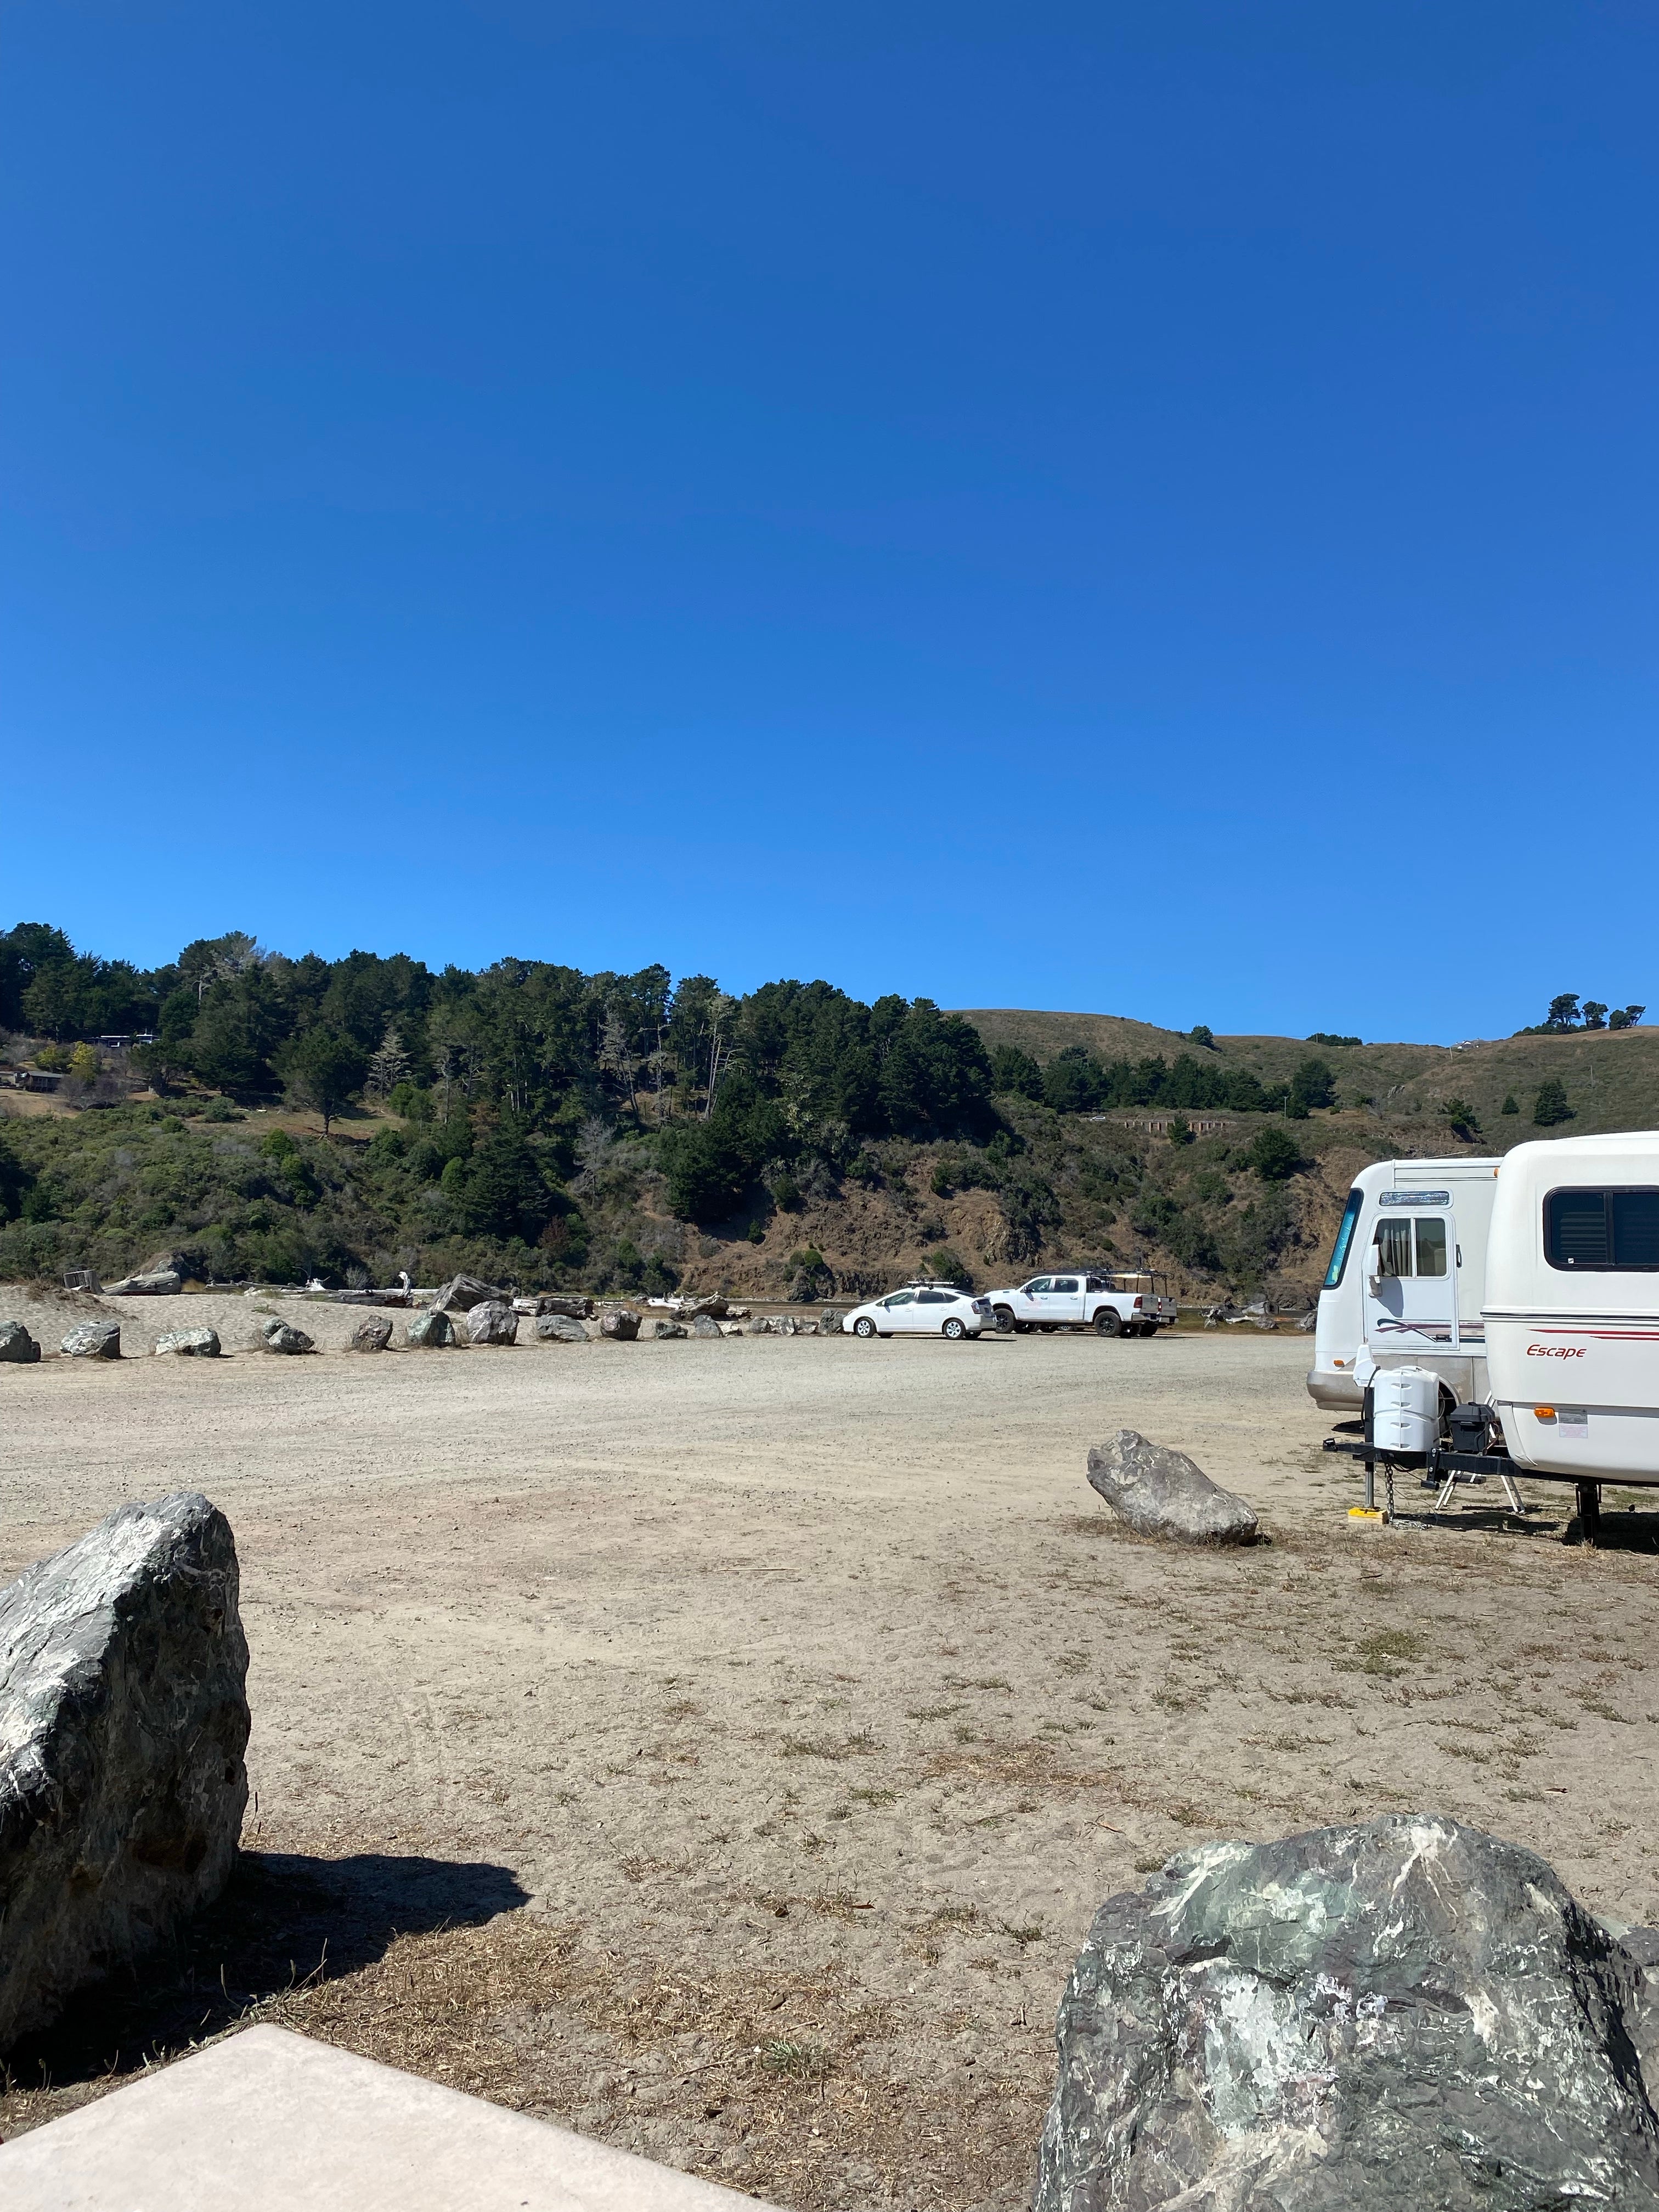 Camper submitted image from Navarro Beach - Navarro River Redwoods State Park - 1